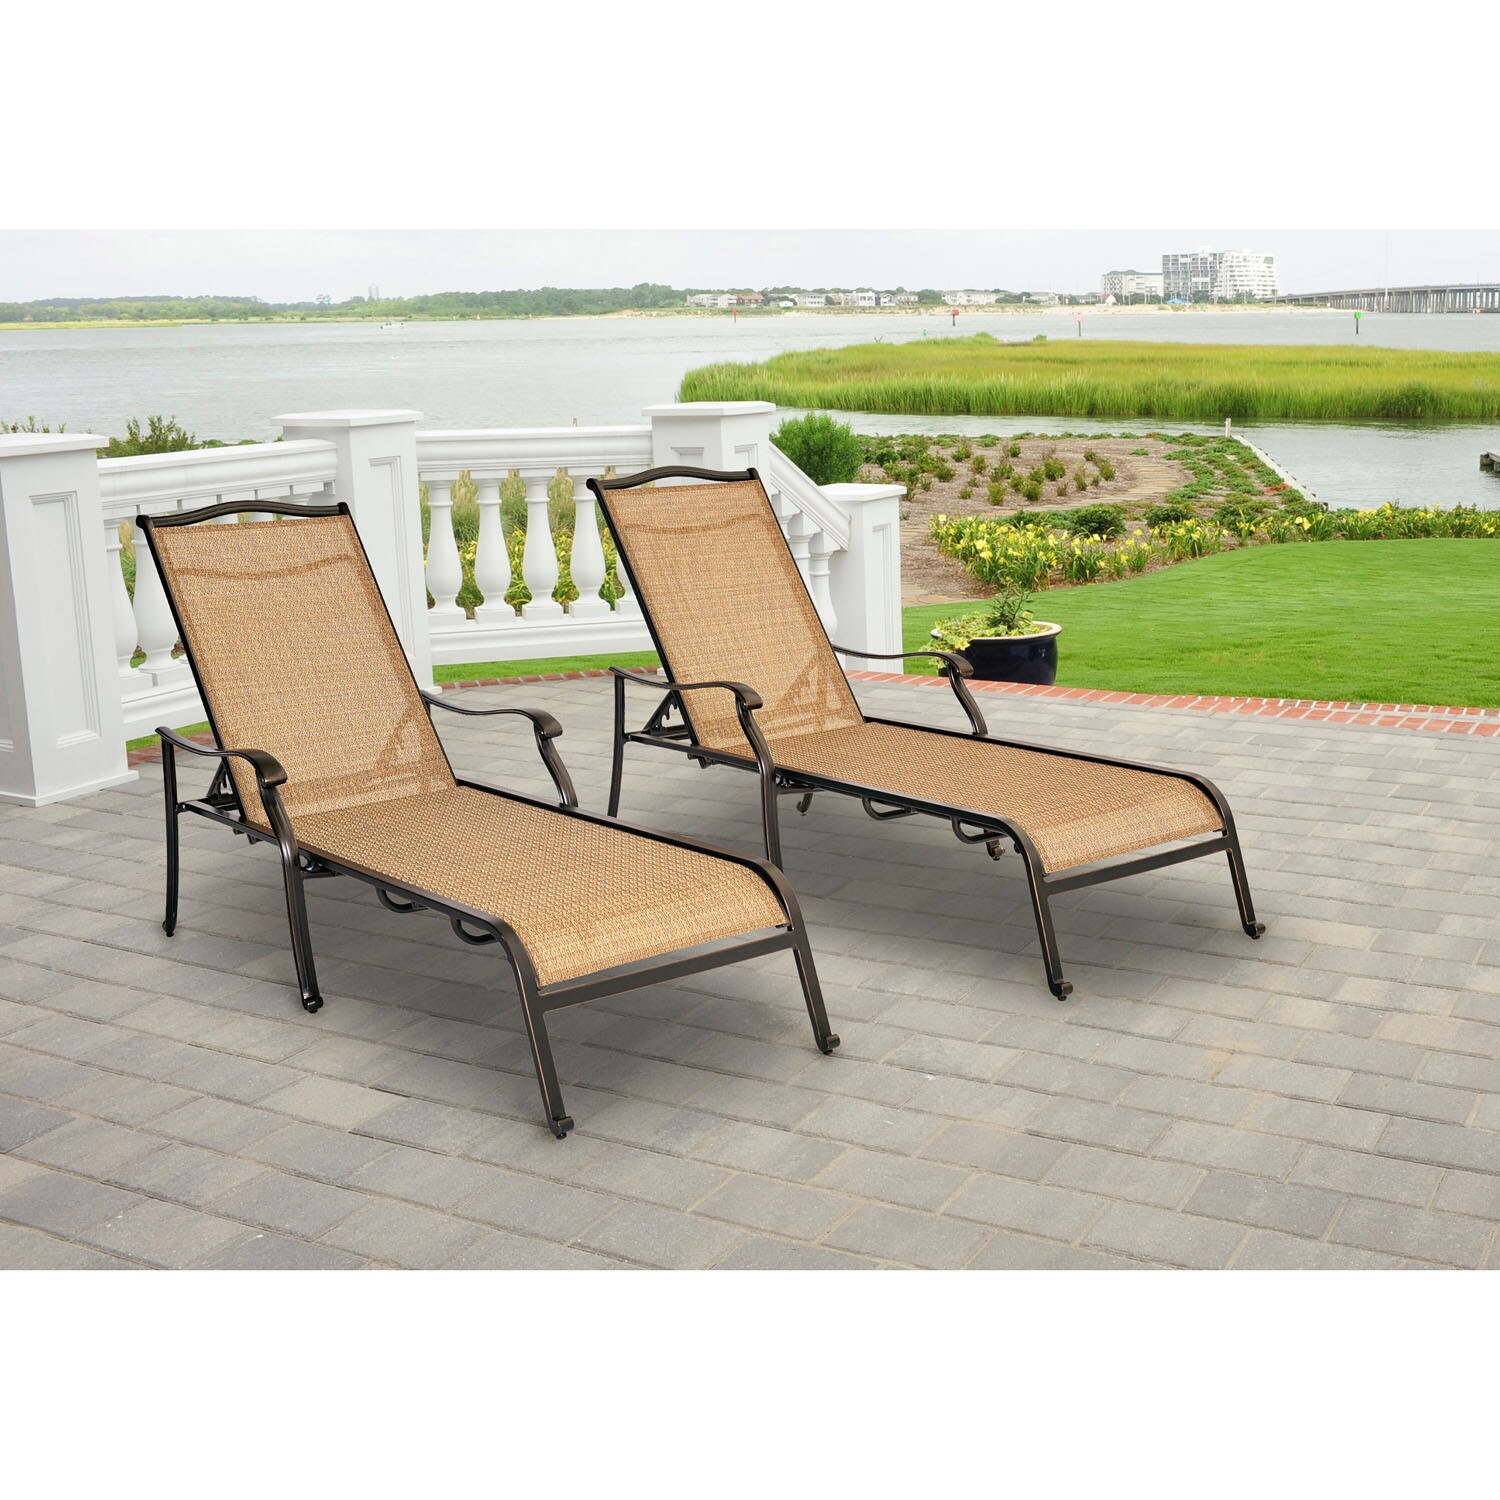 Buy Steel Outdoor Chaise Lounges Online At Overstockcom Our Best